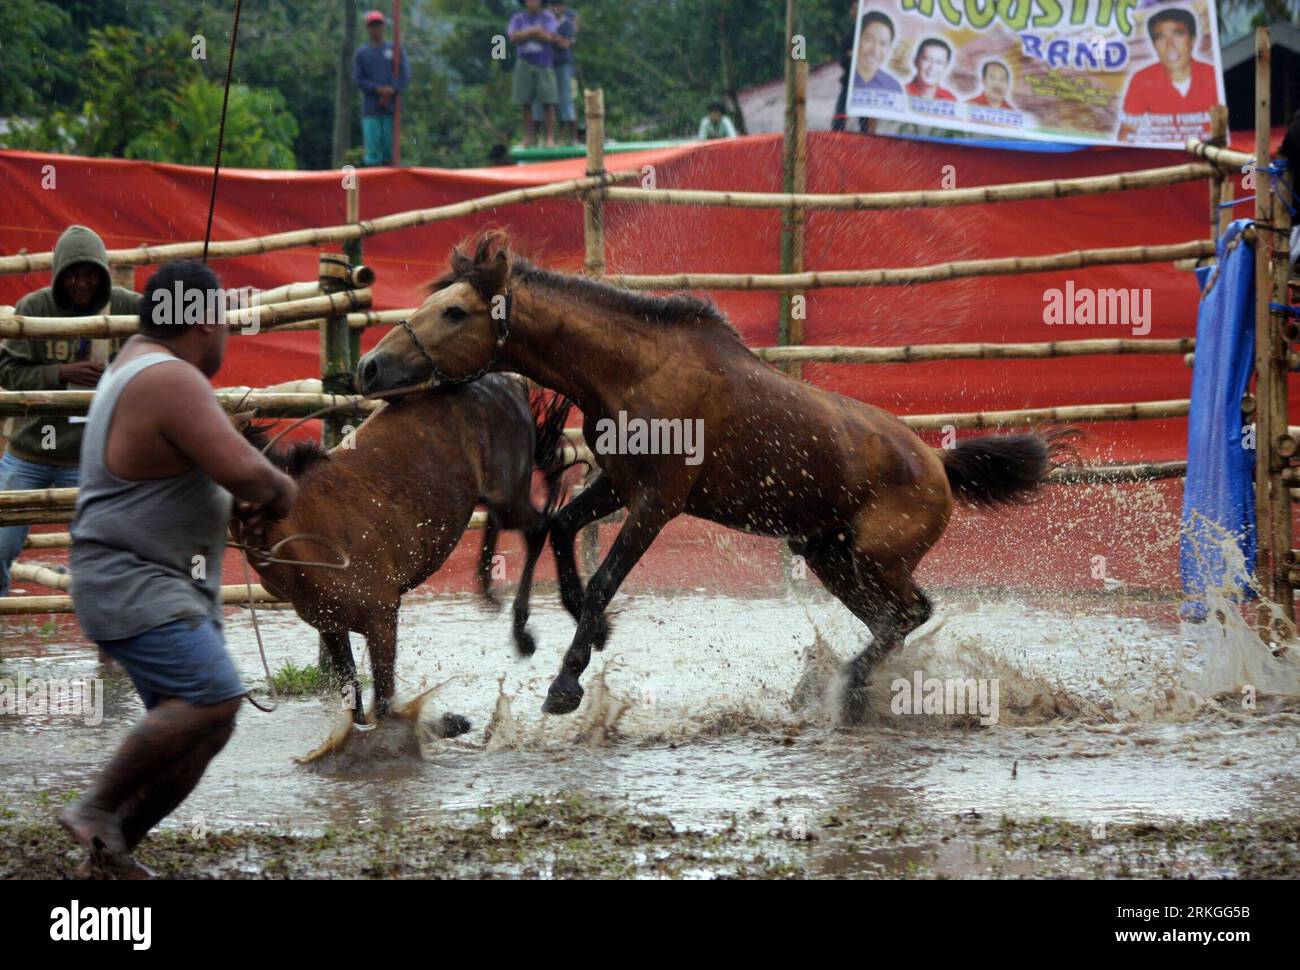 Bildnummer: 55594129  Datum: 14.07.2011  Copyright: imago/Xinhua (110714) -- COTABATO, July 14, 2011 (Xinhua) -- Locals watch a cruel and barbaric of horse fighting as part of Tnalak Festival in Cotabato, Philippines, on July 14, 2011. Stallions are forced to fight to death during the extremely cruel form of entertainment , which still exist in remote towns. (Xinhua/Jeff Maitem)(jy) PHILIPPINES-COTABATO-HORSE FIGHTING PUBLICATIONxNOTxINxCHN Gesellschaft Tier Pferd Kampf Pferdekampf Tierquälerei x0x xtm 2011 quer     Bildnummer 55594129 Date 14 07 2011 Copyright Imago XINHUA  Cotabato July 14 2 Stock Photo